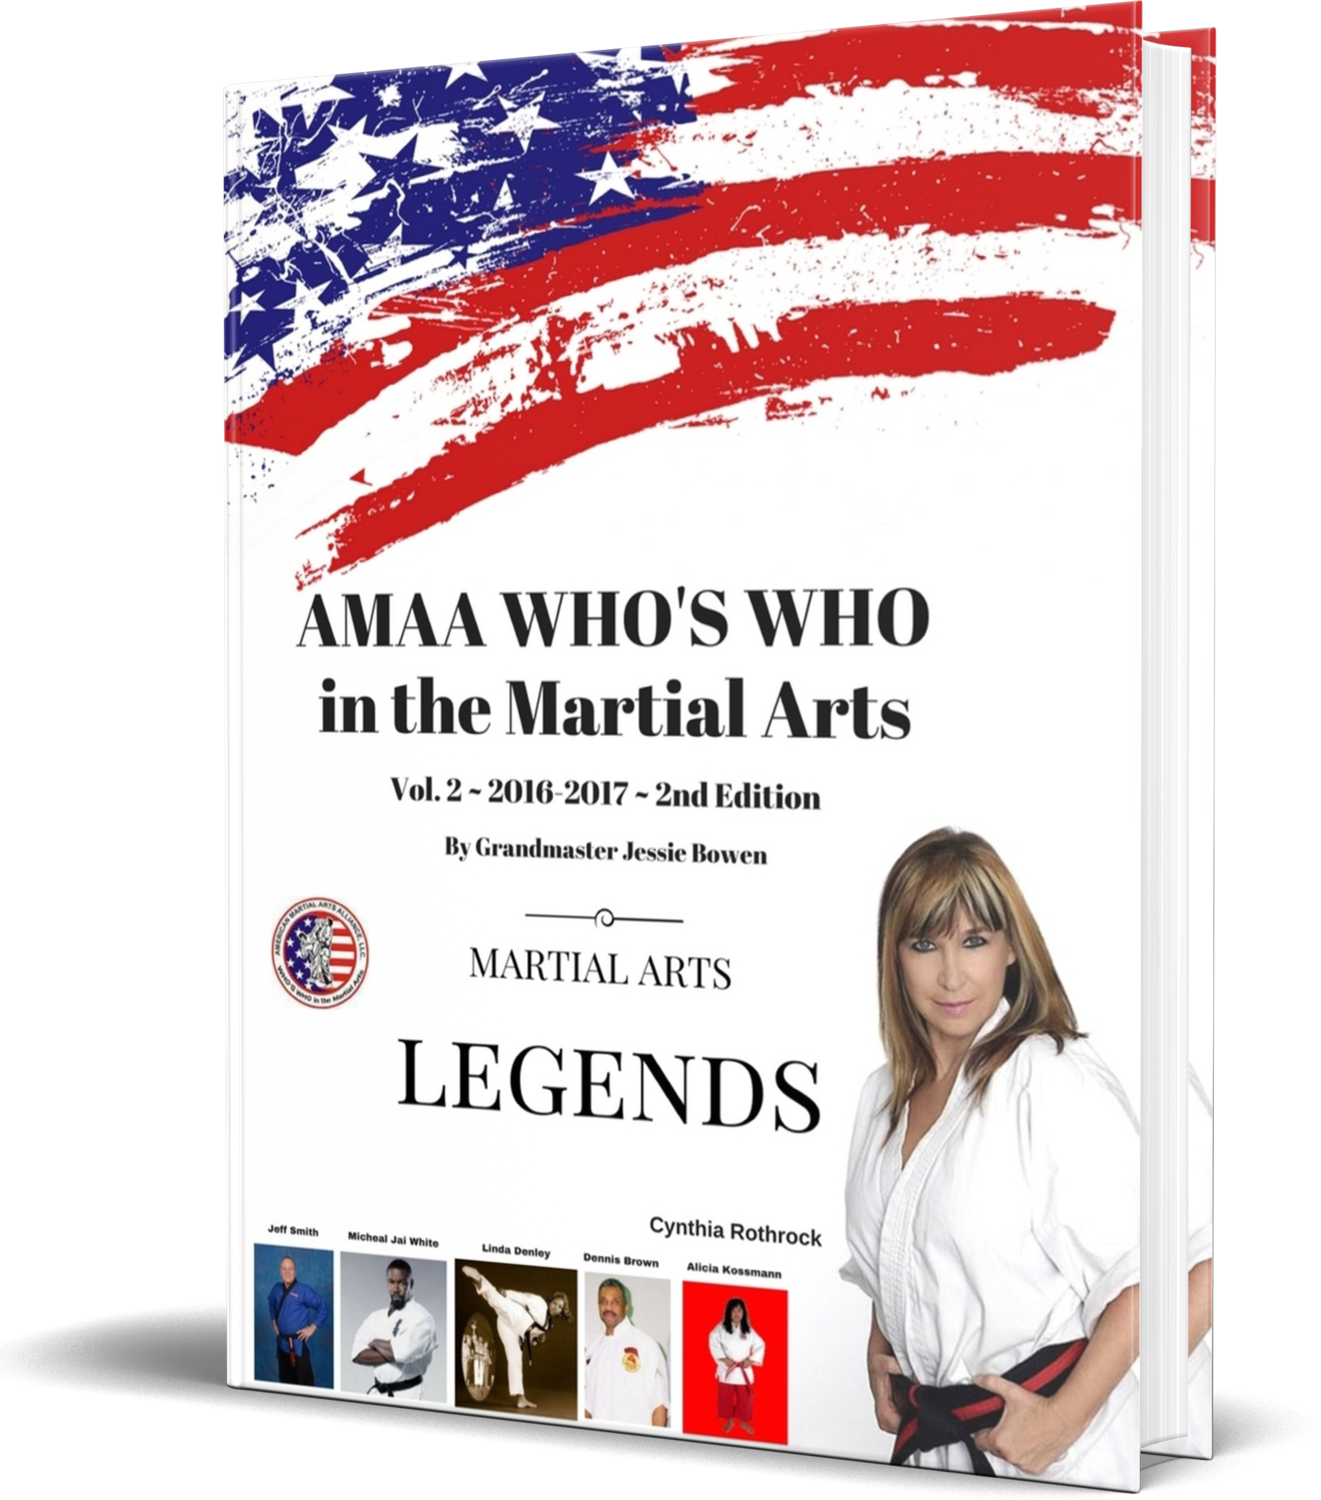 Who's Who in the Martial Arts Volume 2 - Cynthia Rothrock Signed Copy (Paperback)